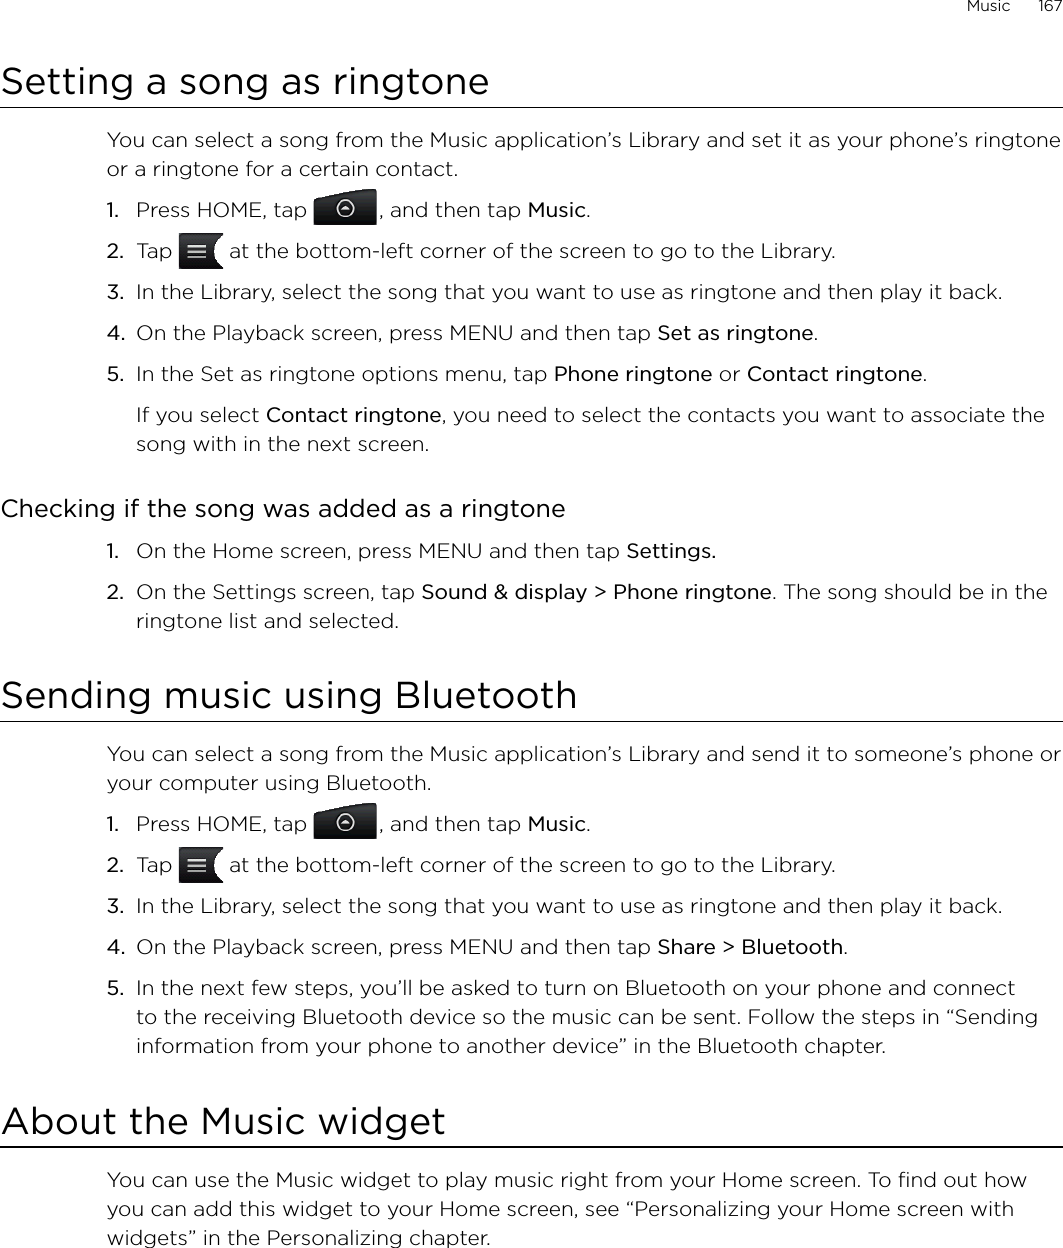 Music      167Setting a song as ringtoneYou can select a song from the Music application’s Library and set it as your phone’s ringtone or a ringtone for a certain contact.Press HOME, tap  , and then tap Music.Tap   at the bottom-left corner of the screen to go to the Library.In the Library, select the song that you want to use as ringtone and then play it back.On the Playback screen, press MENU and then tap Set as ringtone.In the Set as ringtone options menu, tap Phone ringtone or Contact ringtone.If you select Contact ringtone, you need to select the contacts you want to associate the song with in the next screen.Checking if the song was added as a ringtoneOn the Home screen, press MENU and then tap Settings.On the Settings screen, tap Sound &amp; display &gt; Phone ringtone. The song should be in the ringtone list and selected. Sending music using BluetoothYou can select a song from the Music application’s Library and send it to someone’s phone or your computer using Bluetooth.Press HOME, tap  , and then tap Music.Tap   at the bottom-left corner of the screen to go to the Library.In the Library, select the song that you want to use as ringtone and then play it back.On the Playback screen, press MENU and then tap Share &gt; Bluetooth.In the next few steps, you’ll be asked to turn on Bluetooth on your phone and connect to the receiving Bluetooth device so the music can be sent. Follow the steps in “Sending information from your phone to another device” in the Bluetooth chapter.About the Music widgetYou can use the Music widget to play music right from your Home screen. To find out how you can add this widget to your Home screen, see “Personalizing your Home screen with widgets” in the Personalizing chapter.1.2.3.4.5.1.2.1.2.3.4.5.